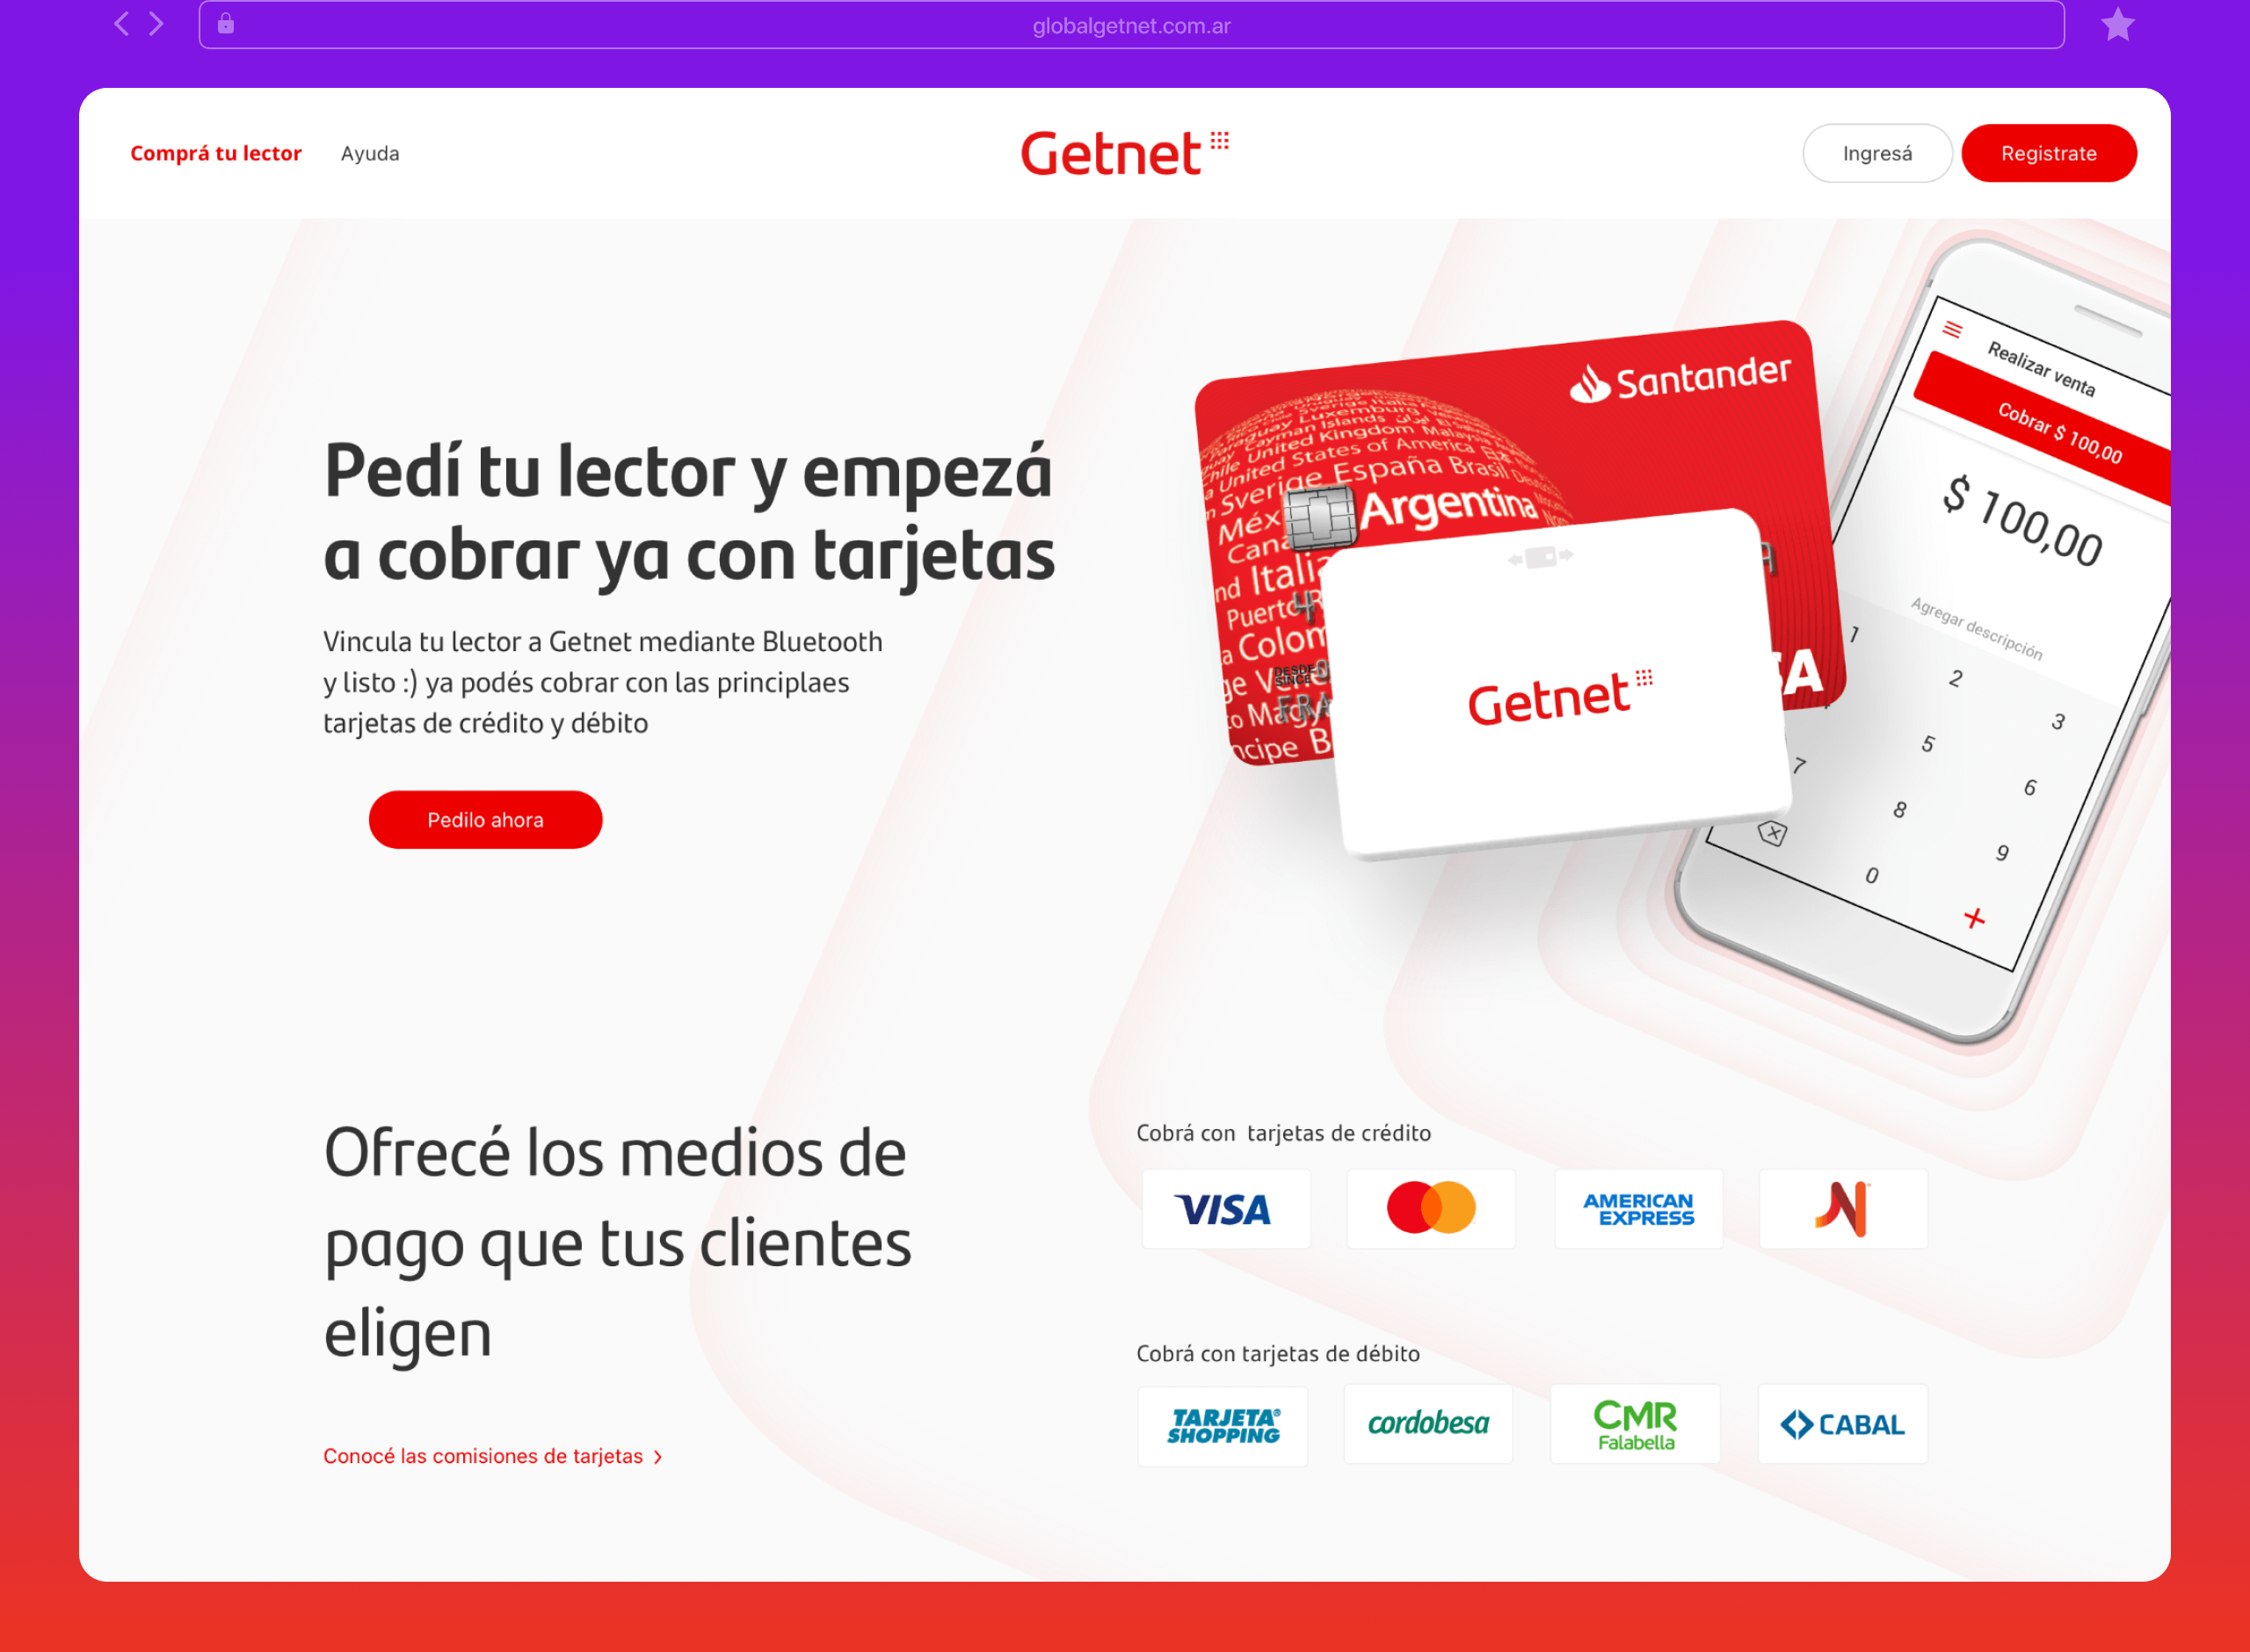 Image of the main page of Getnet, a Santander Solution for paymets